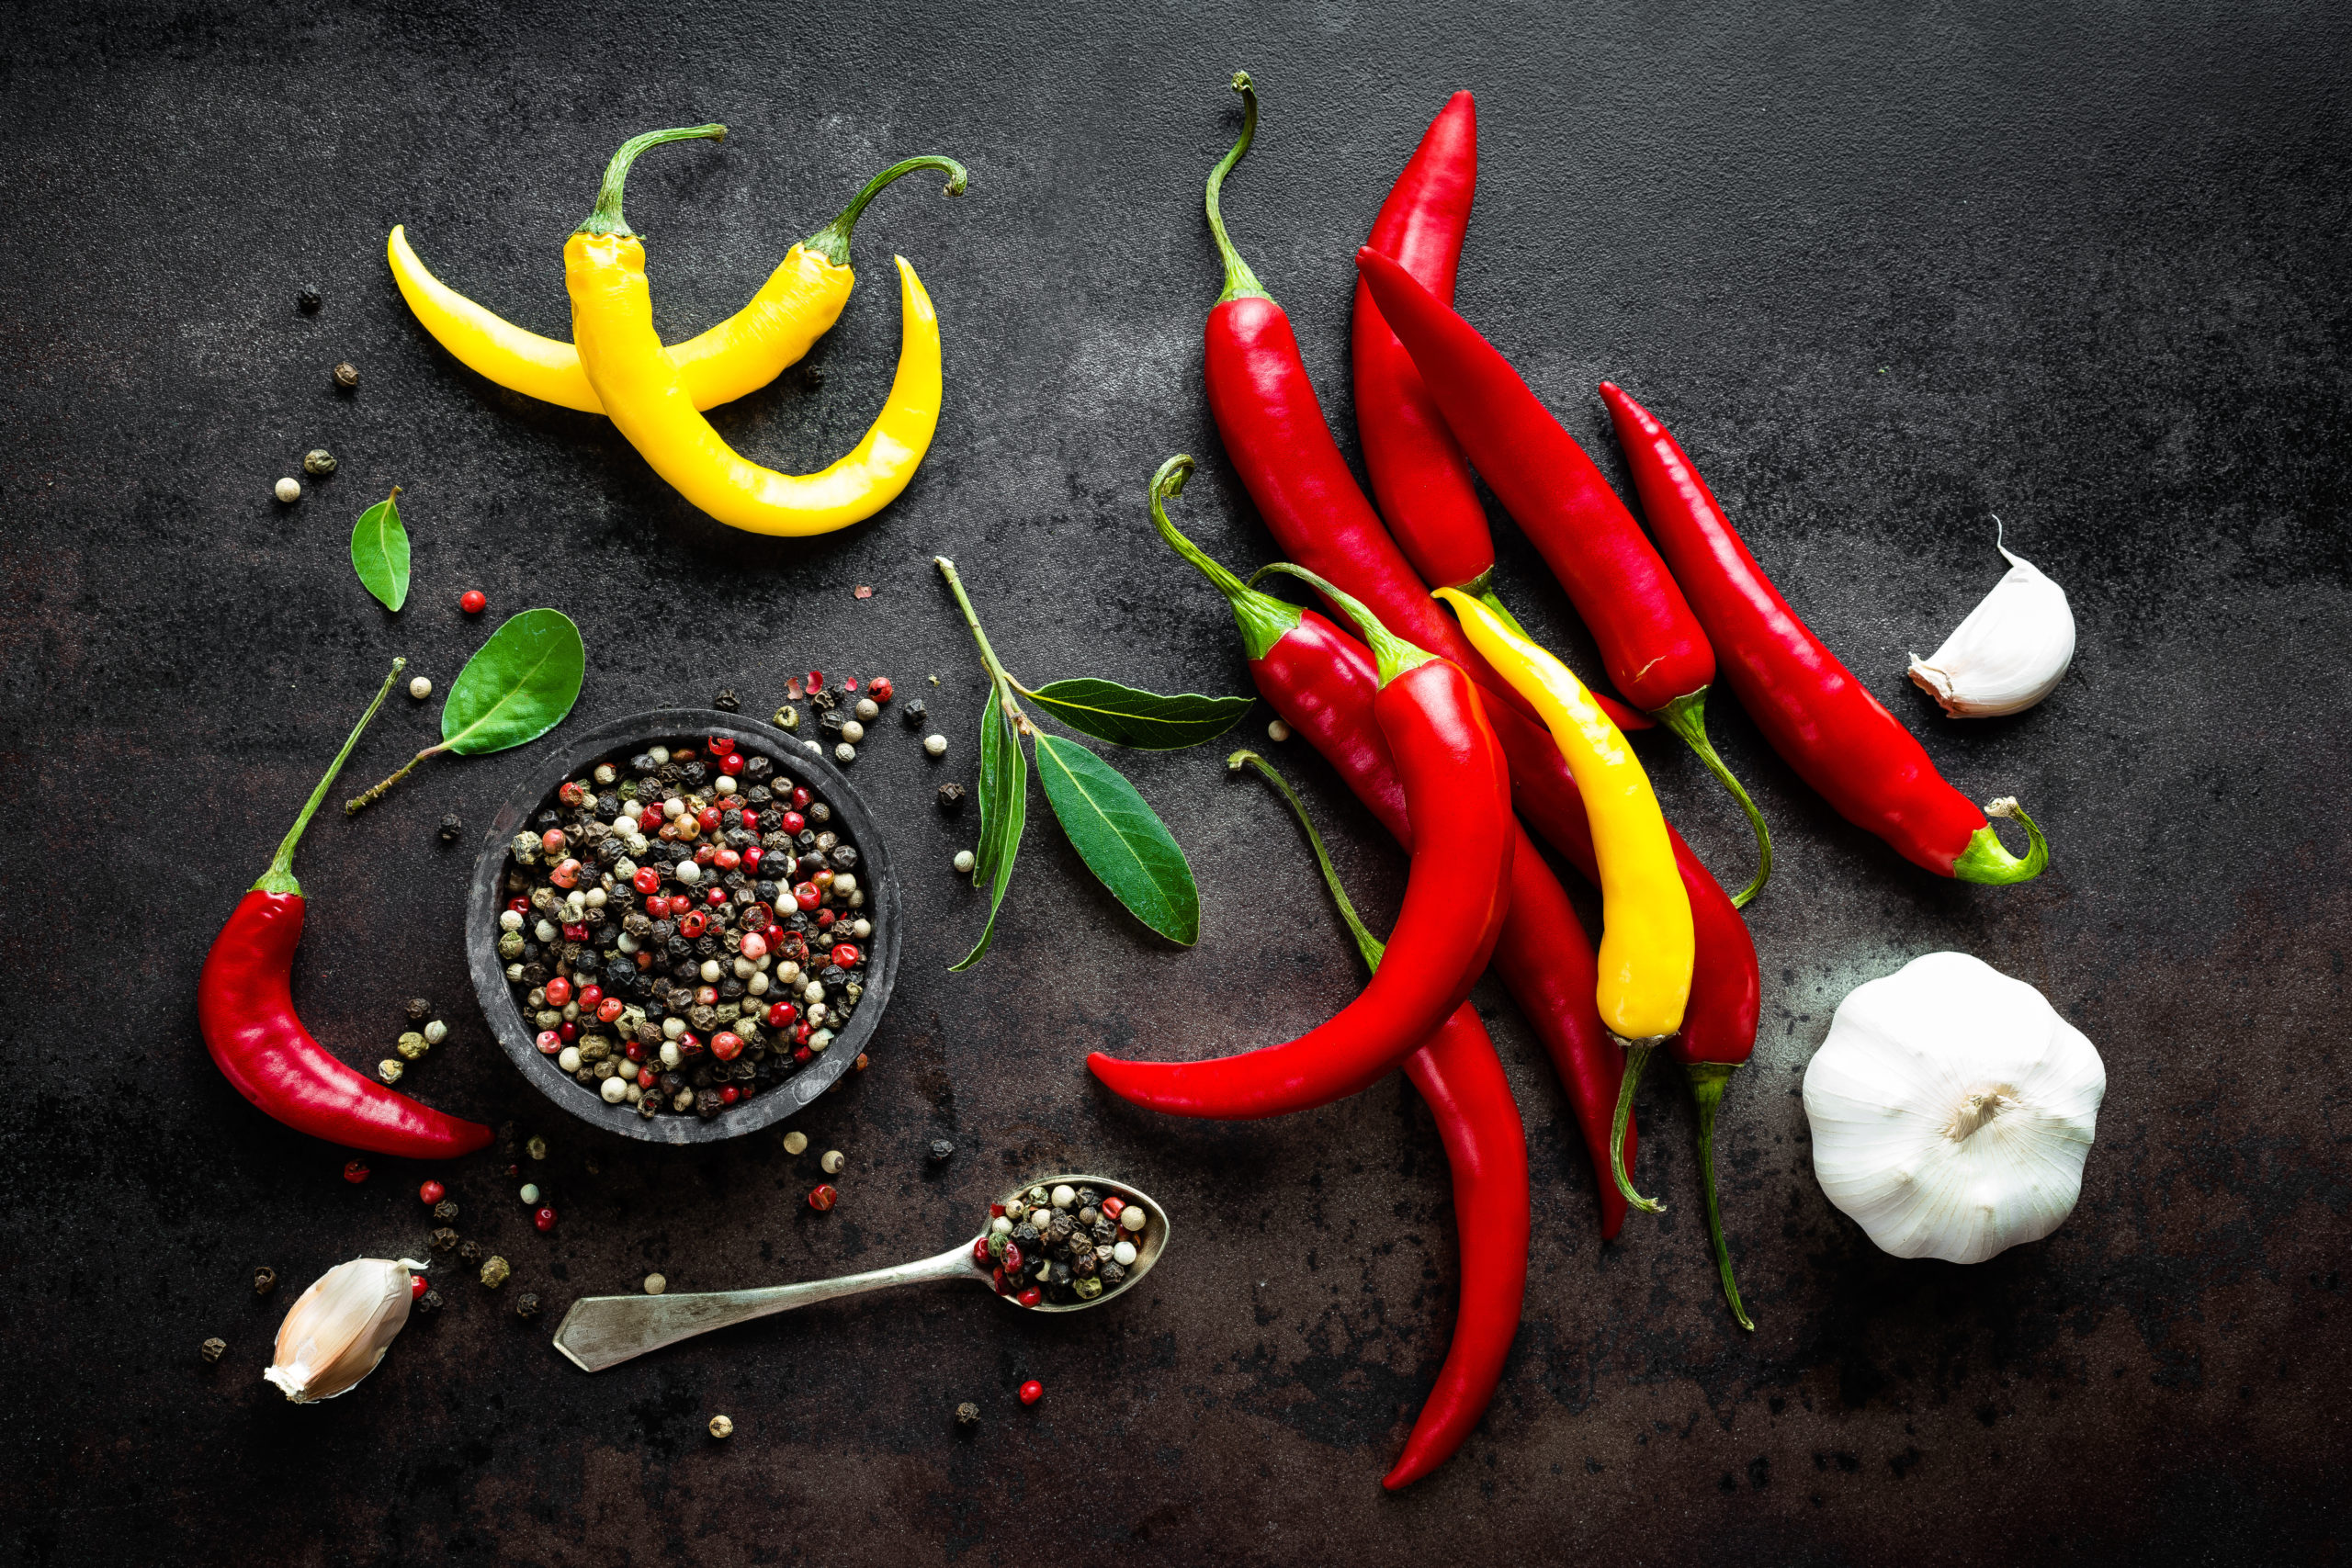 Recipes for International Hot & Spicy Food Day NetCost Market